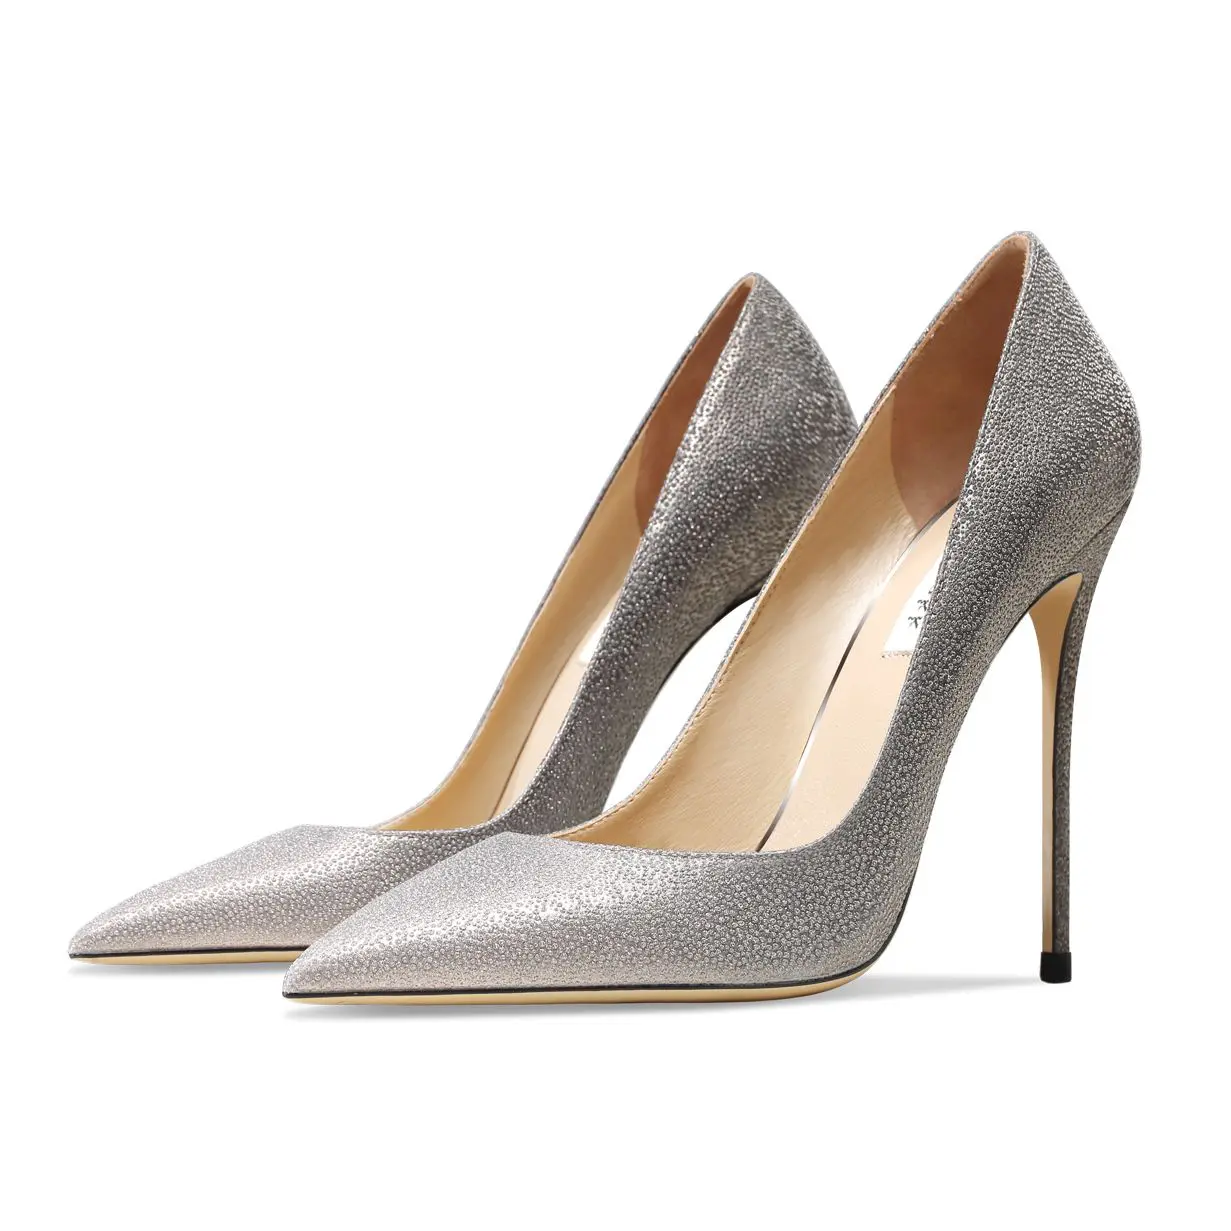 15 most comfortable high heel shoes for 2020 - Briefly.co.za